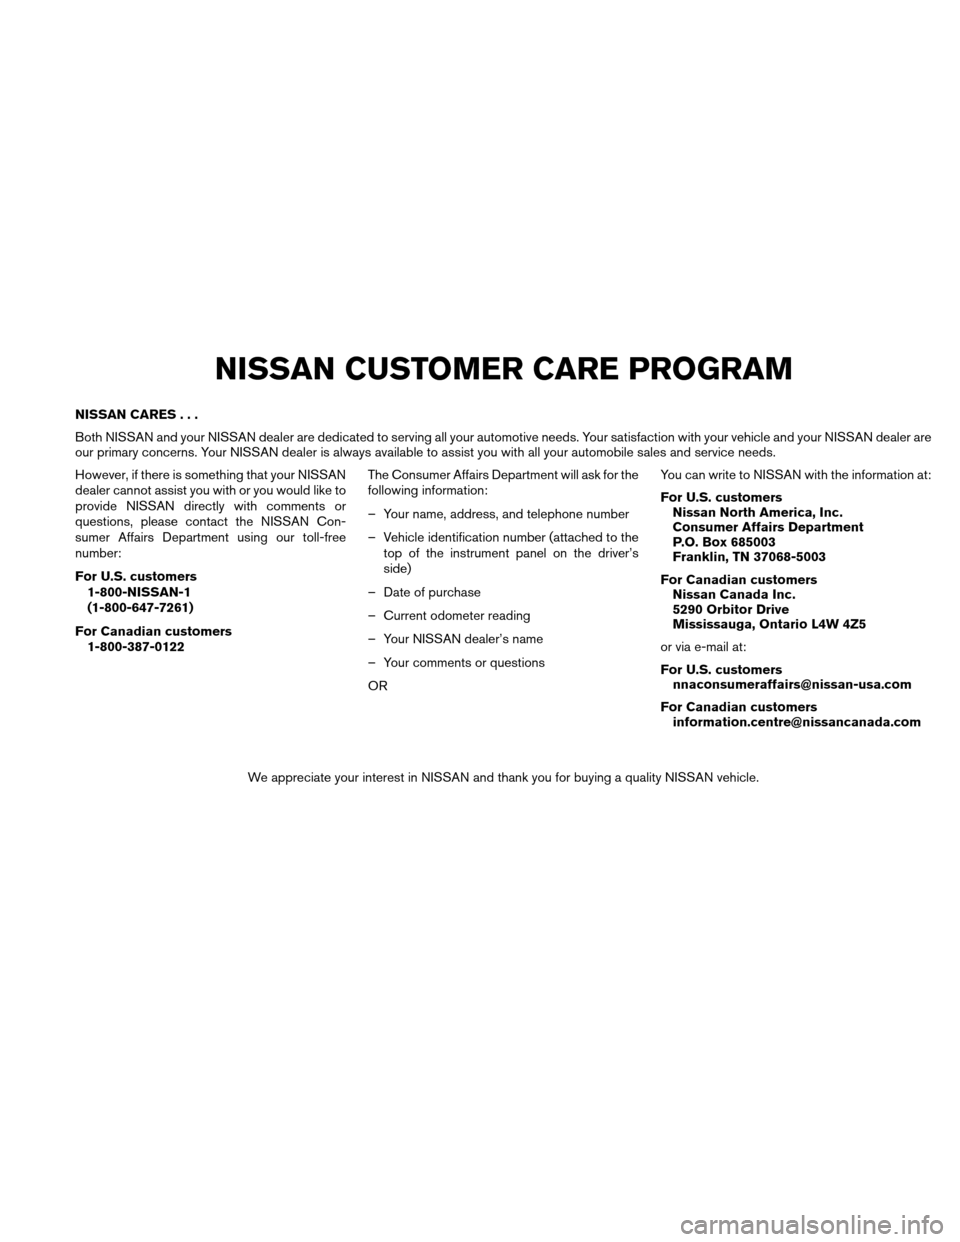 NISSAN VERSA HATCHBACK 2011 1.G Owners Manual NISSAN CARES...
Both NISSAN and your NISSAN dealer are dedicated to serving all your automotive needs. Your satisfaction with your vehicle and your NISSAN dealer are
our primary concerns. Your NISSAN 